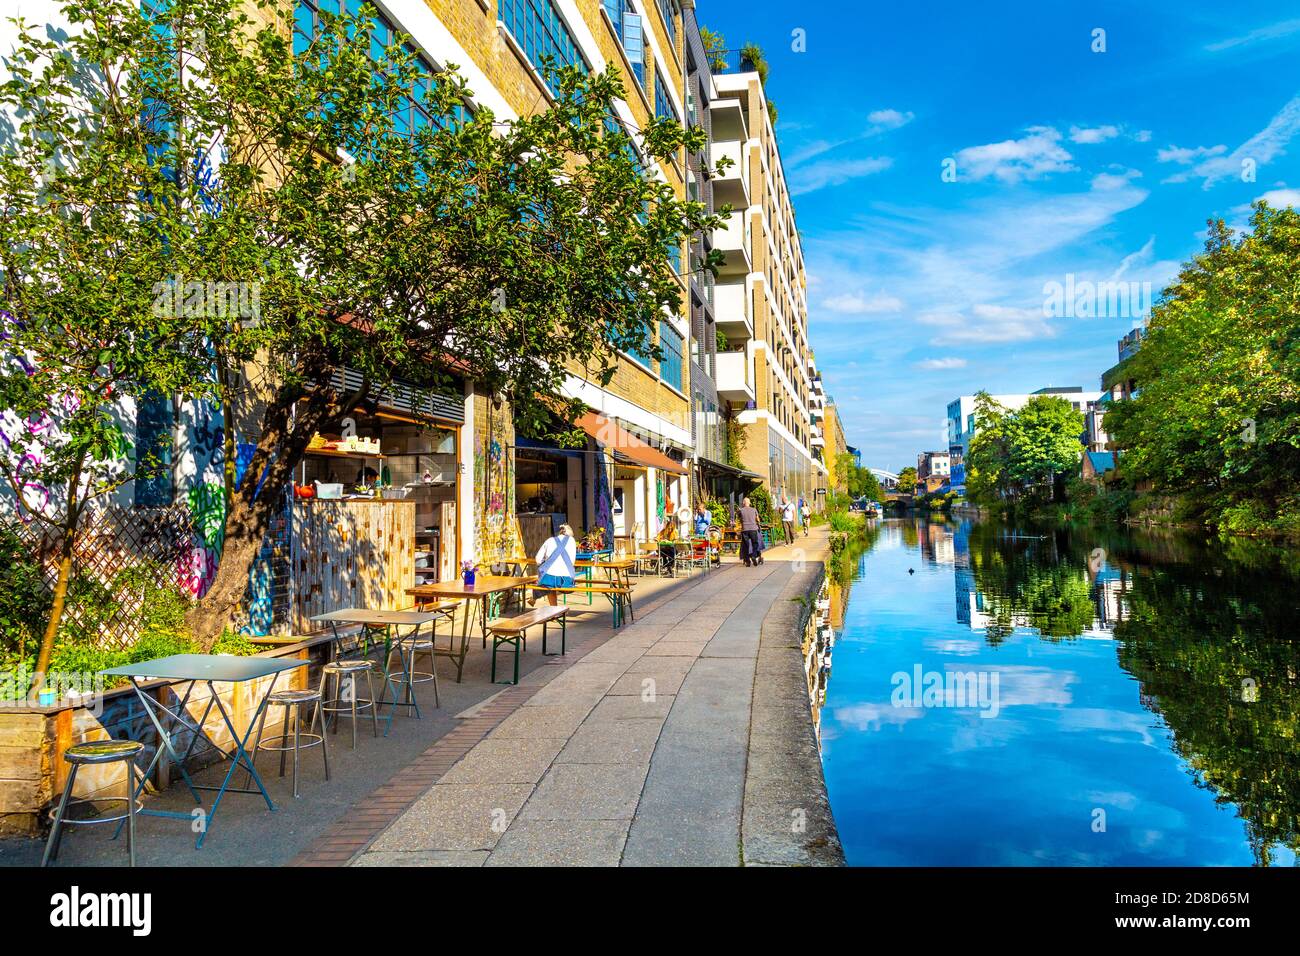 Towpath Cafe by Regents Canal in De Beauvoir Town, London, UK Stock Photo